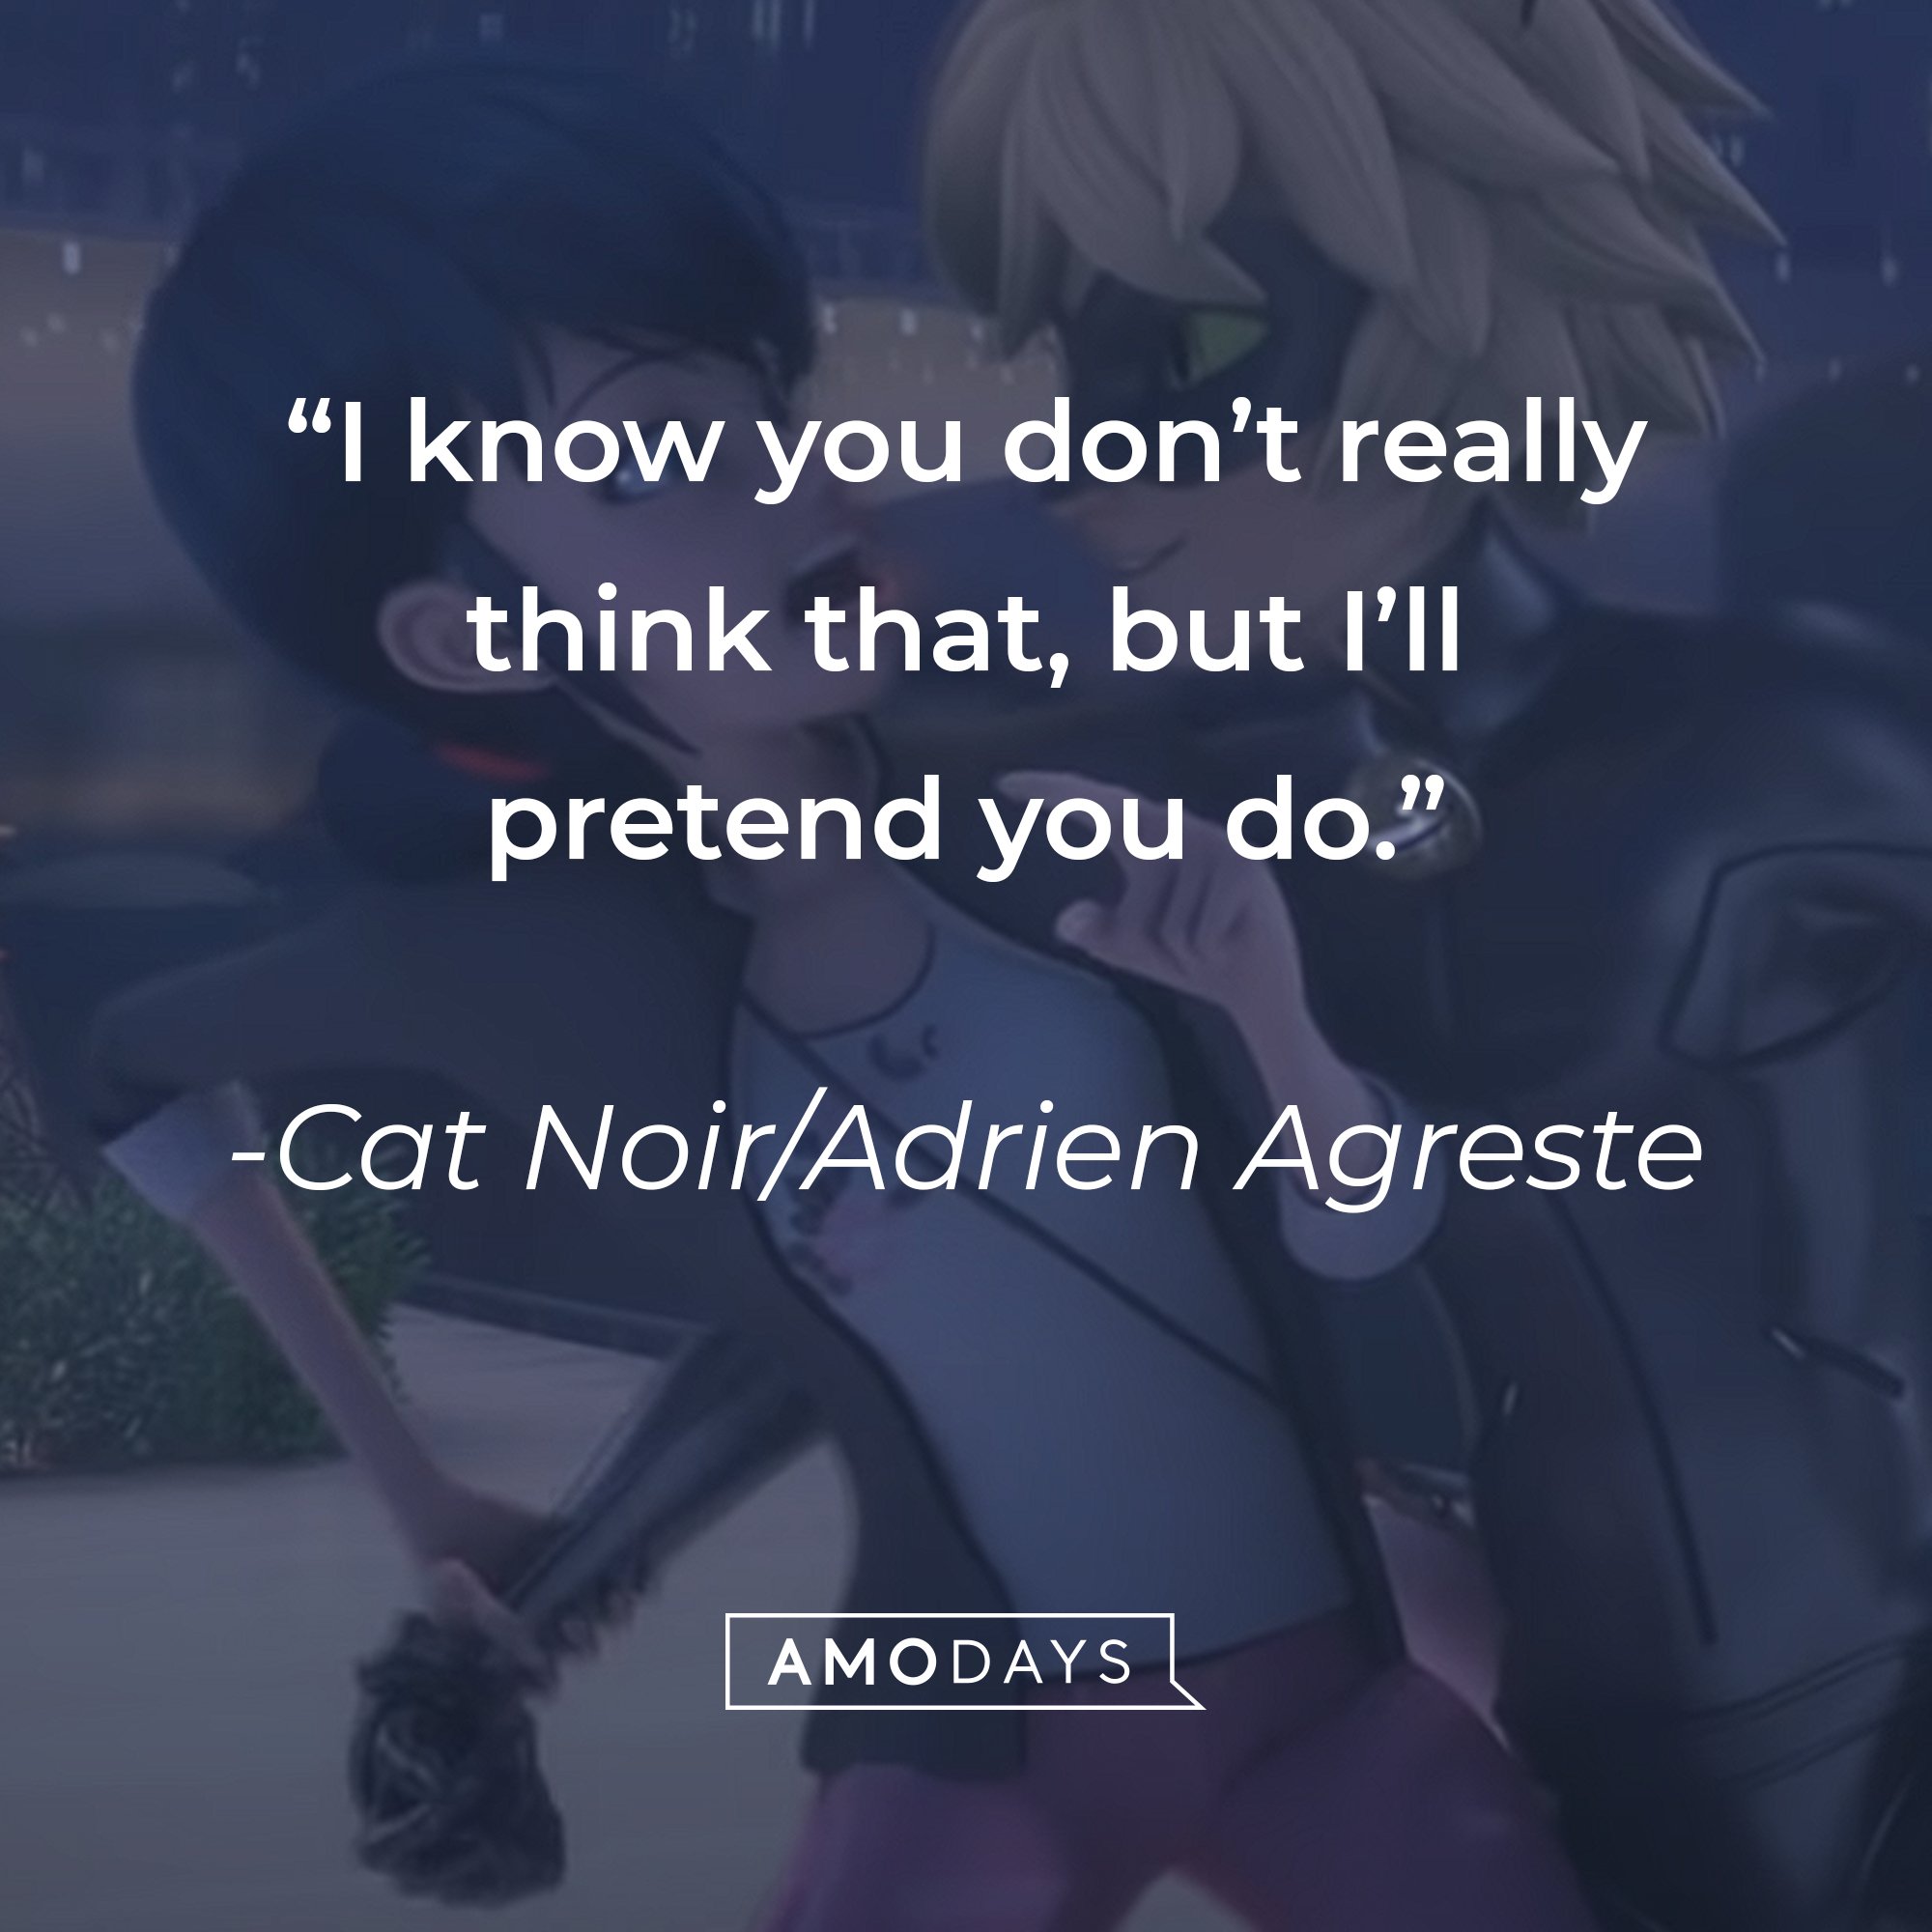 Cat Noir/Adrien Agreste’s quote: “I know you don’t really think that, but I’ll pretend you do.” | Image: AmoDays 